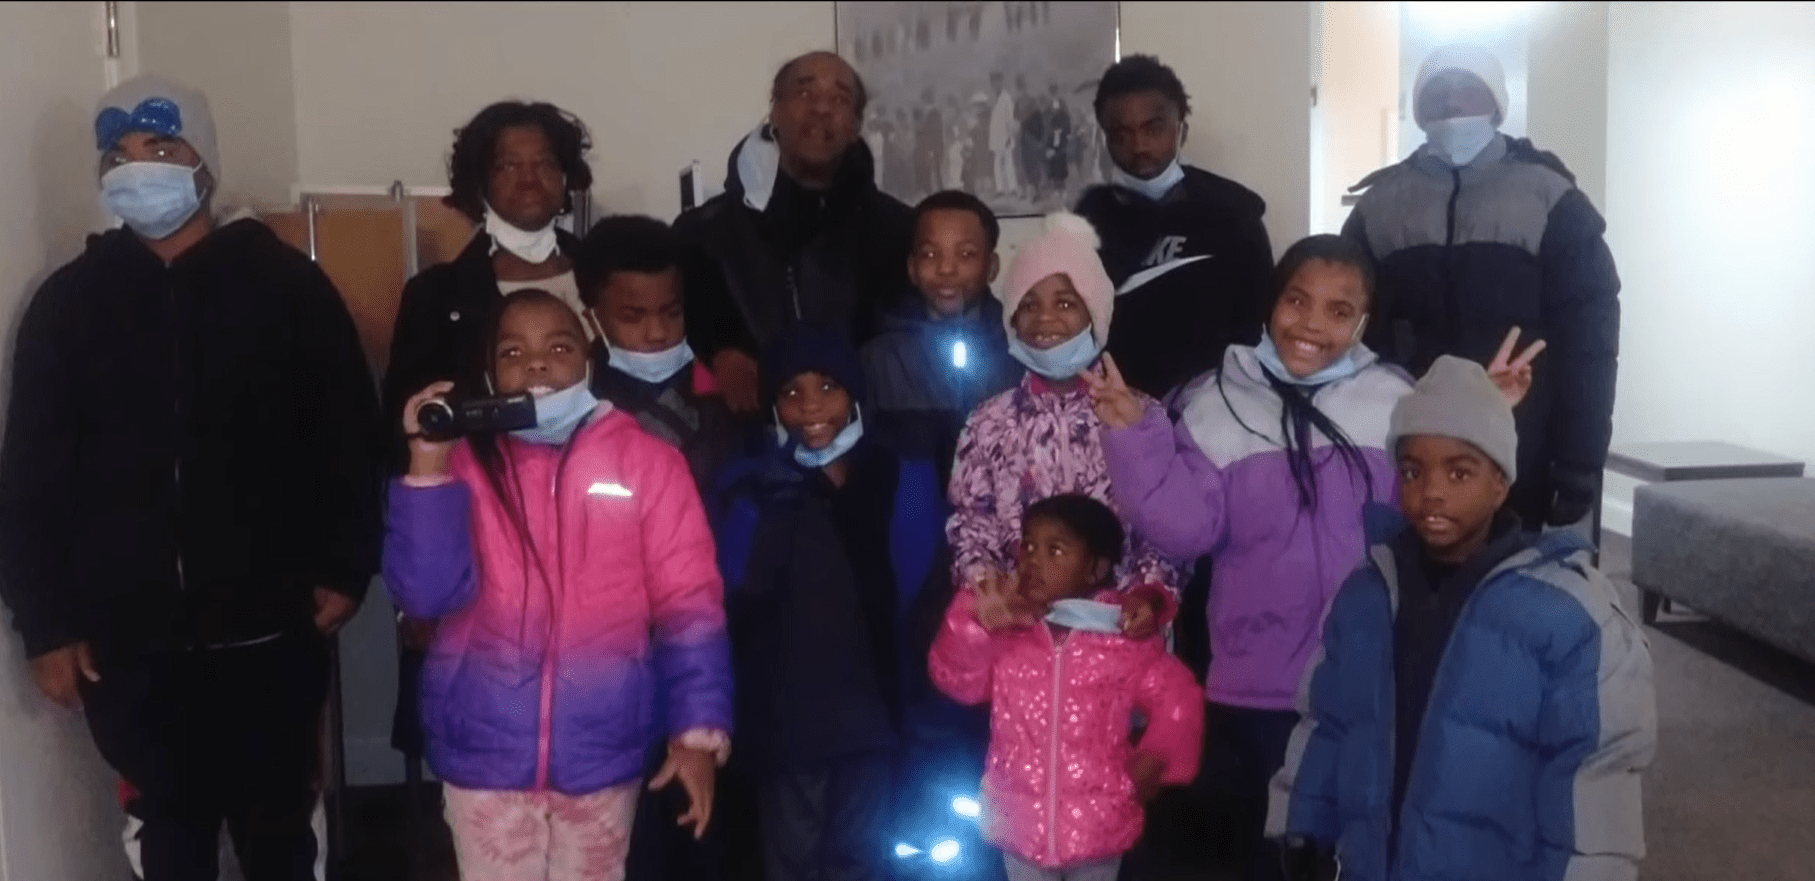 James Harris, his children and few church members in a group photo. | Source: youtube.com/News 5 Cleveland